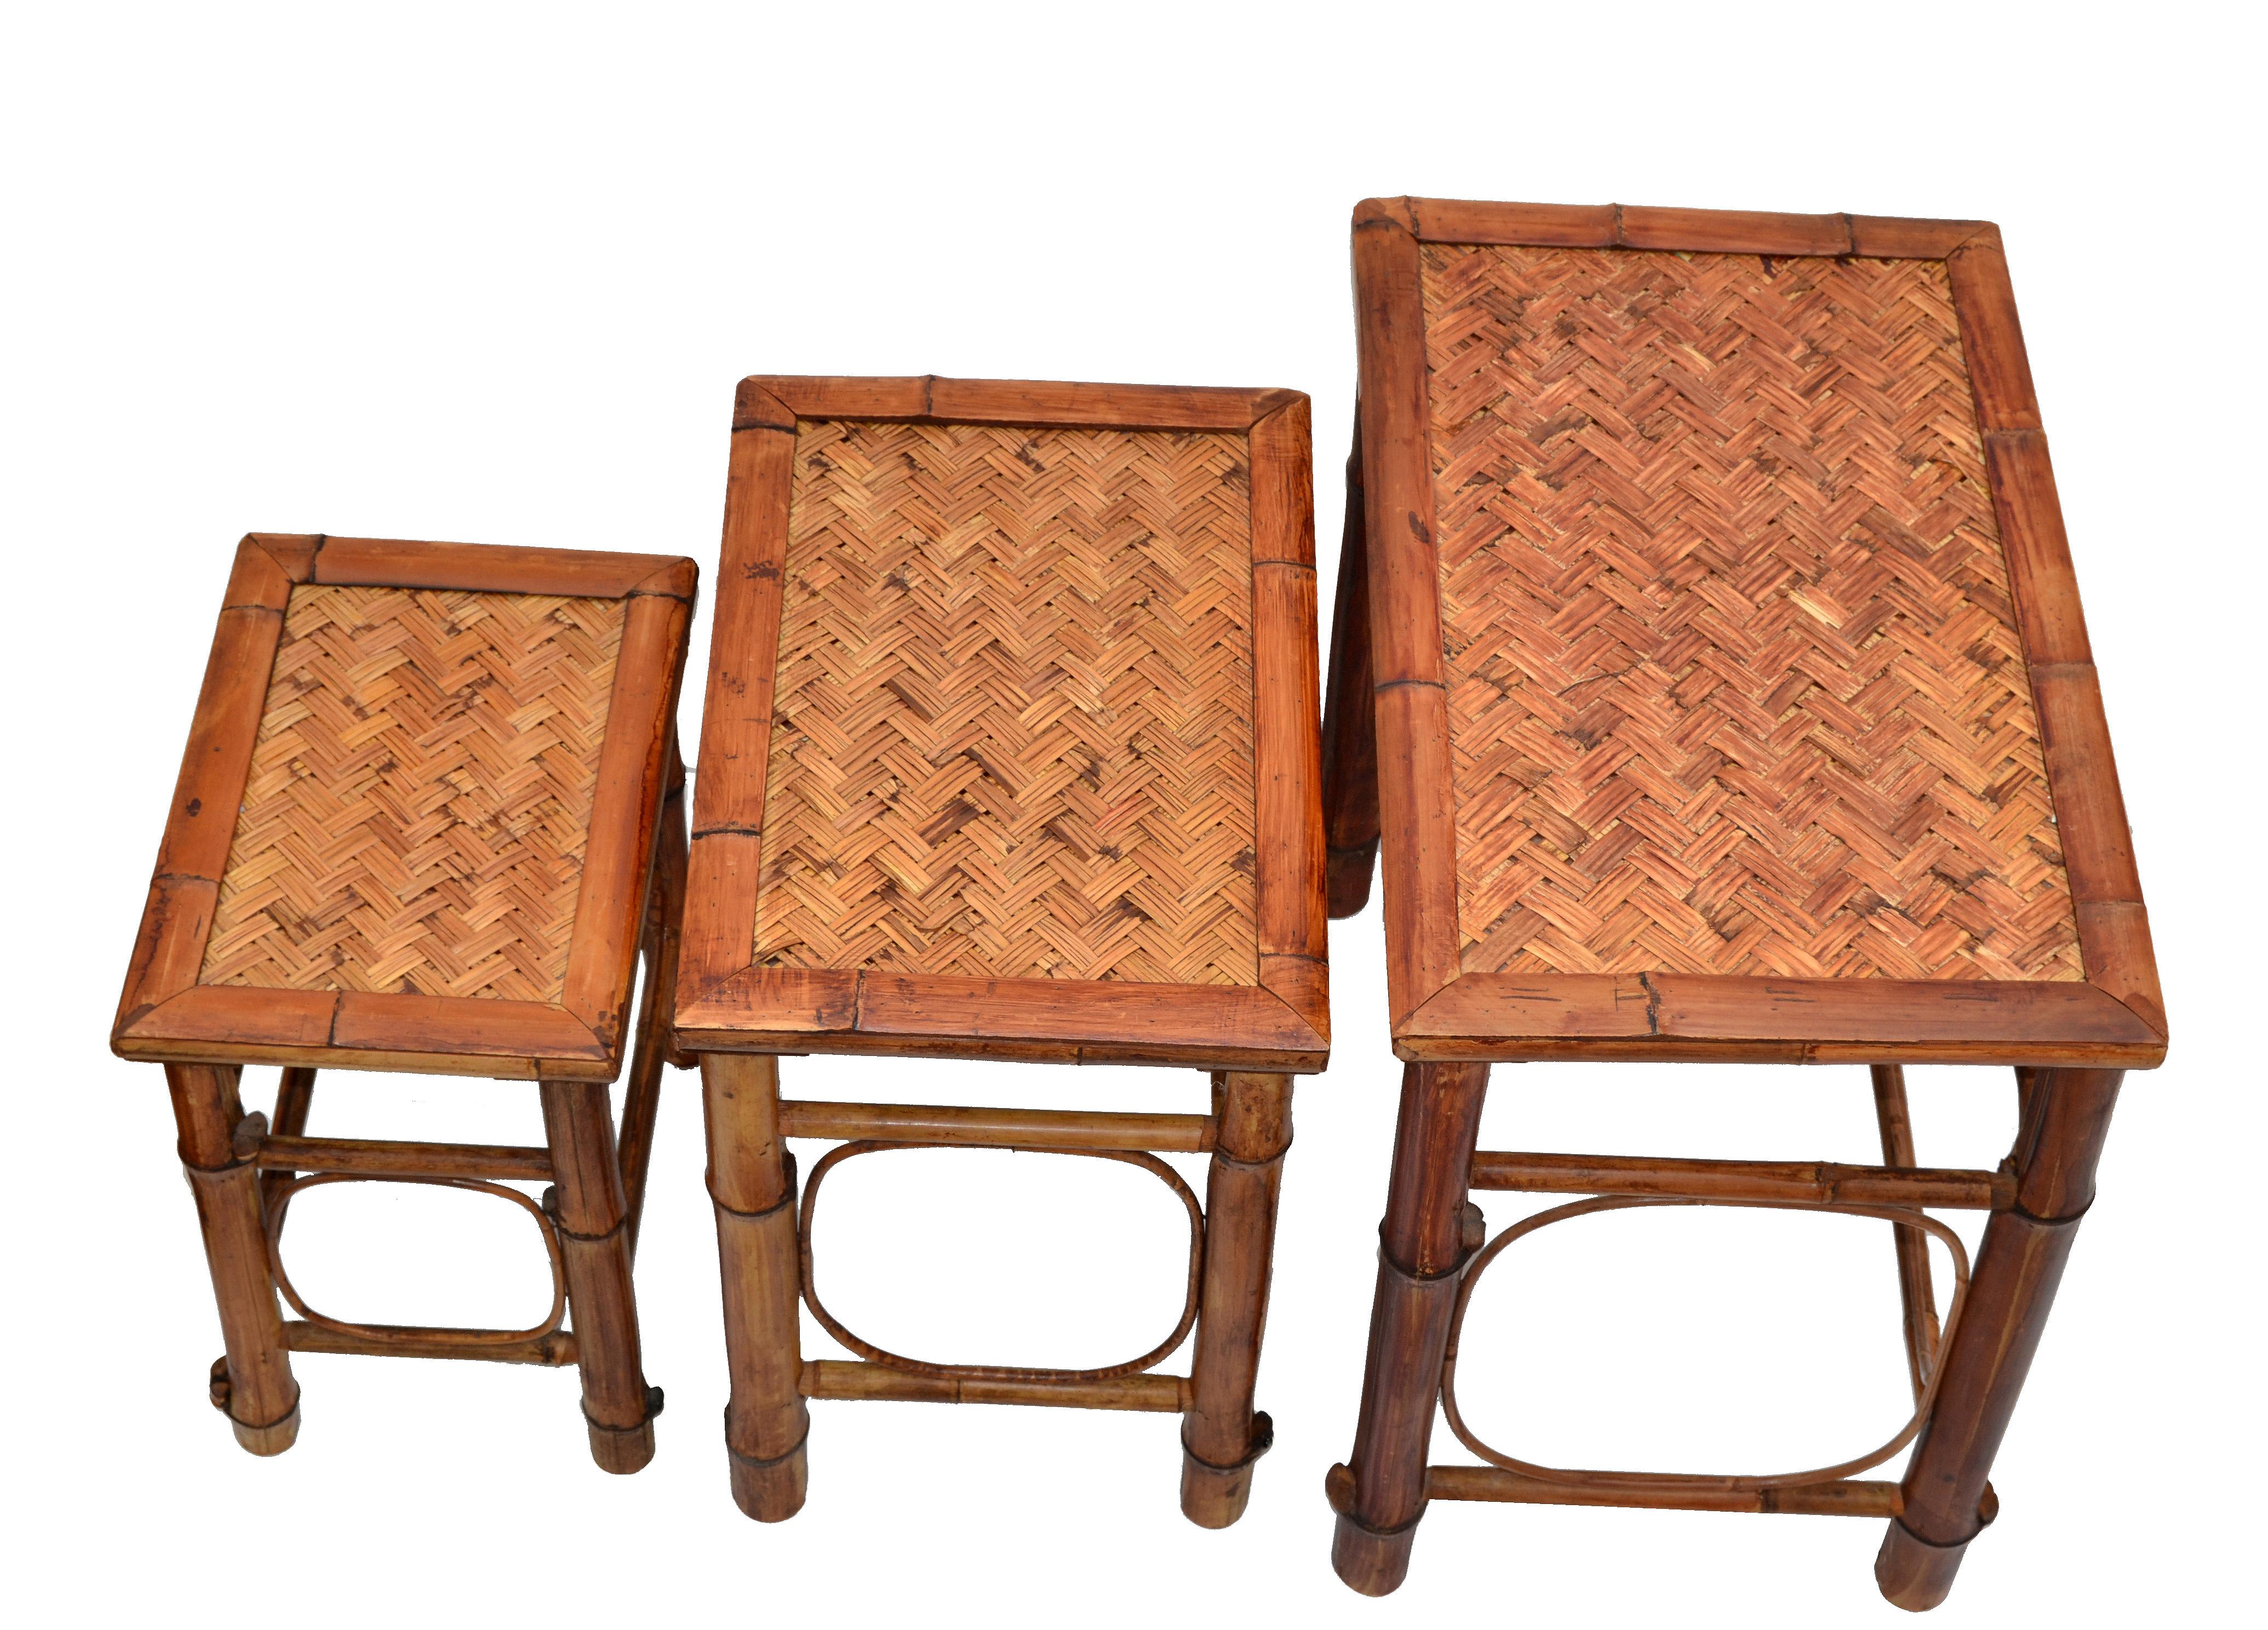 Asian modern chinoiserie bamboo & handwoven cane top set of 3 nesting tables or stacking tables.
Size of each table:
14.25 D x 22.25 L x 21.25 inches H.
12.25 D x 13.25 L x 17.75 inches H.
10.0 D x 13.63 L x 15.75 inches H.